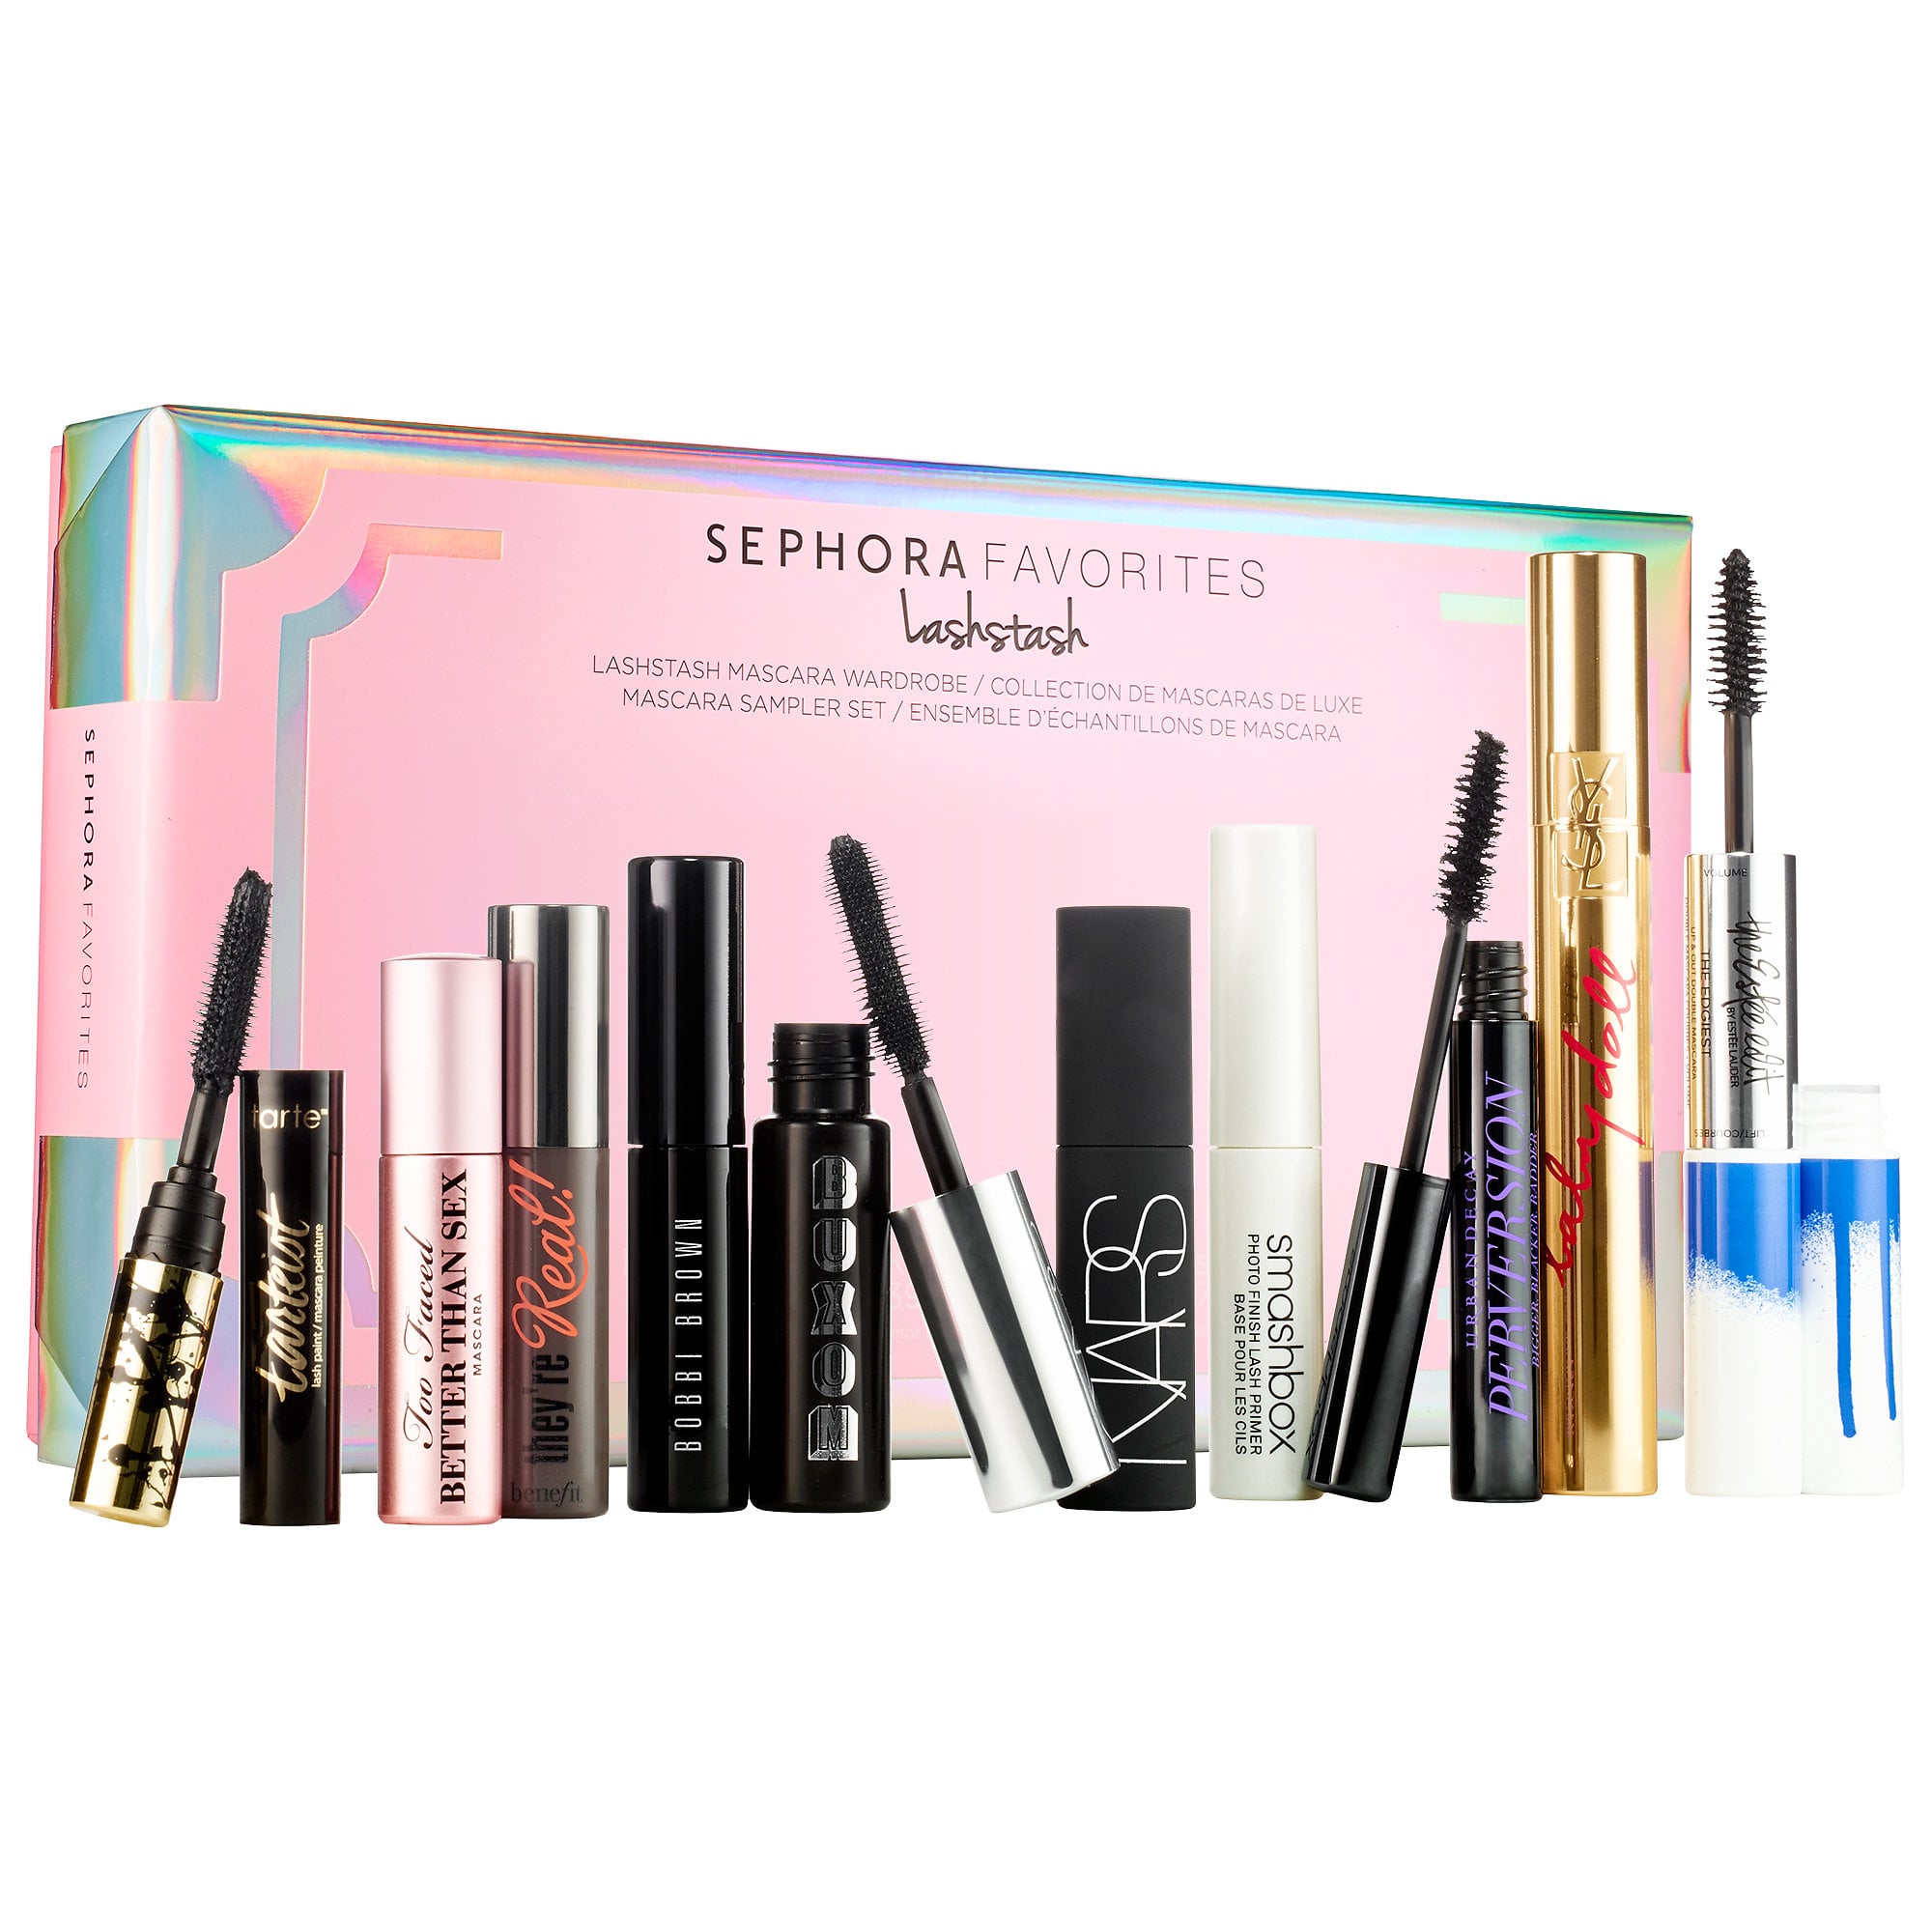 Udvinding Justerbar tredobbelt Sephora Favorites Lashstash | 20 Limited-Edition Beauty Gift Sets That You  Need to Grab Before They're Gone Forever | POPSUGAR Beauty Photo 14